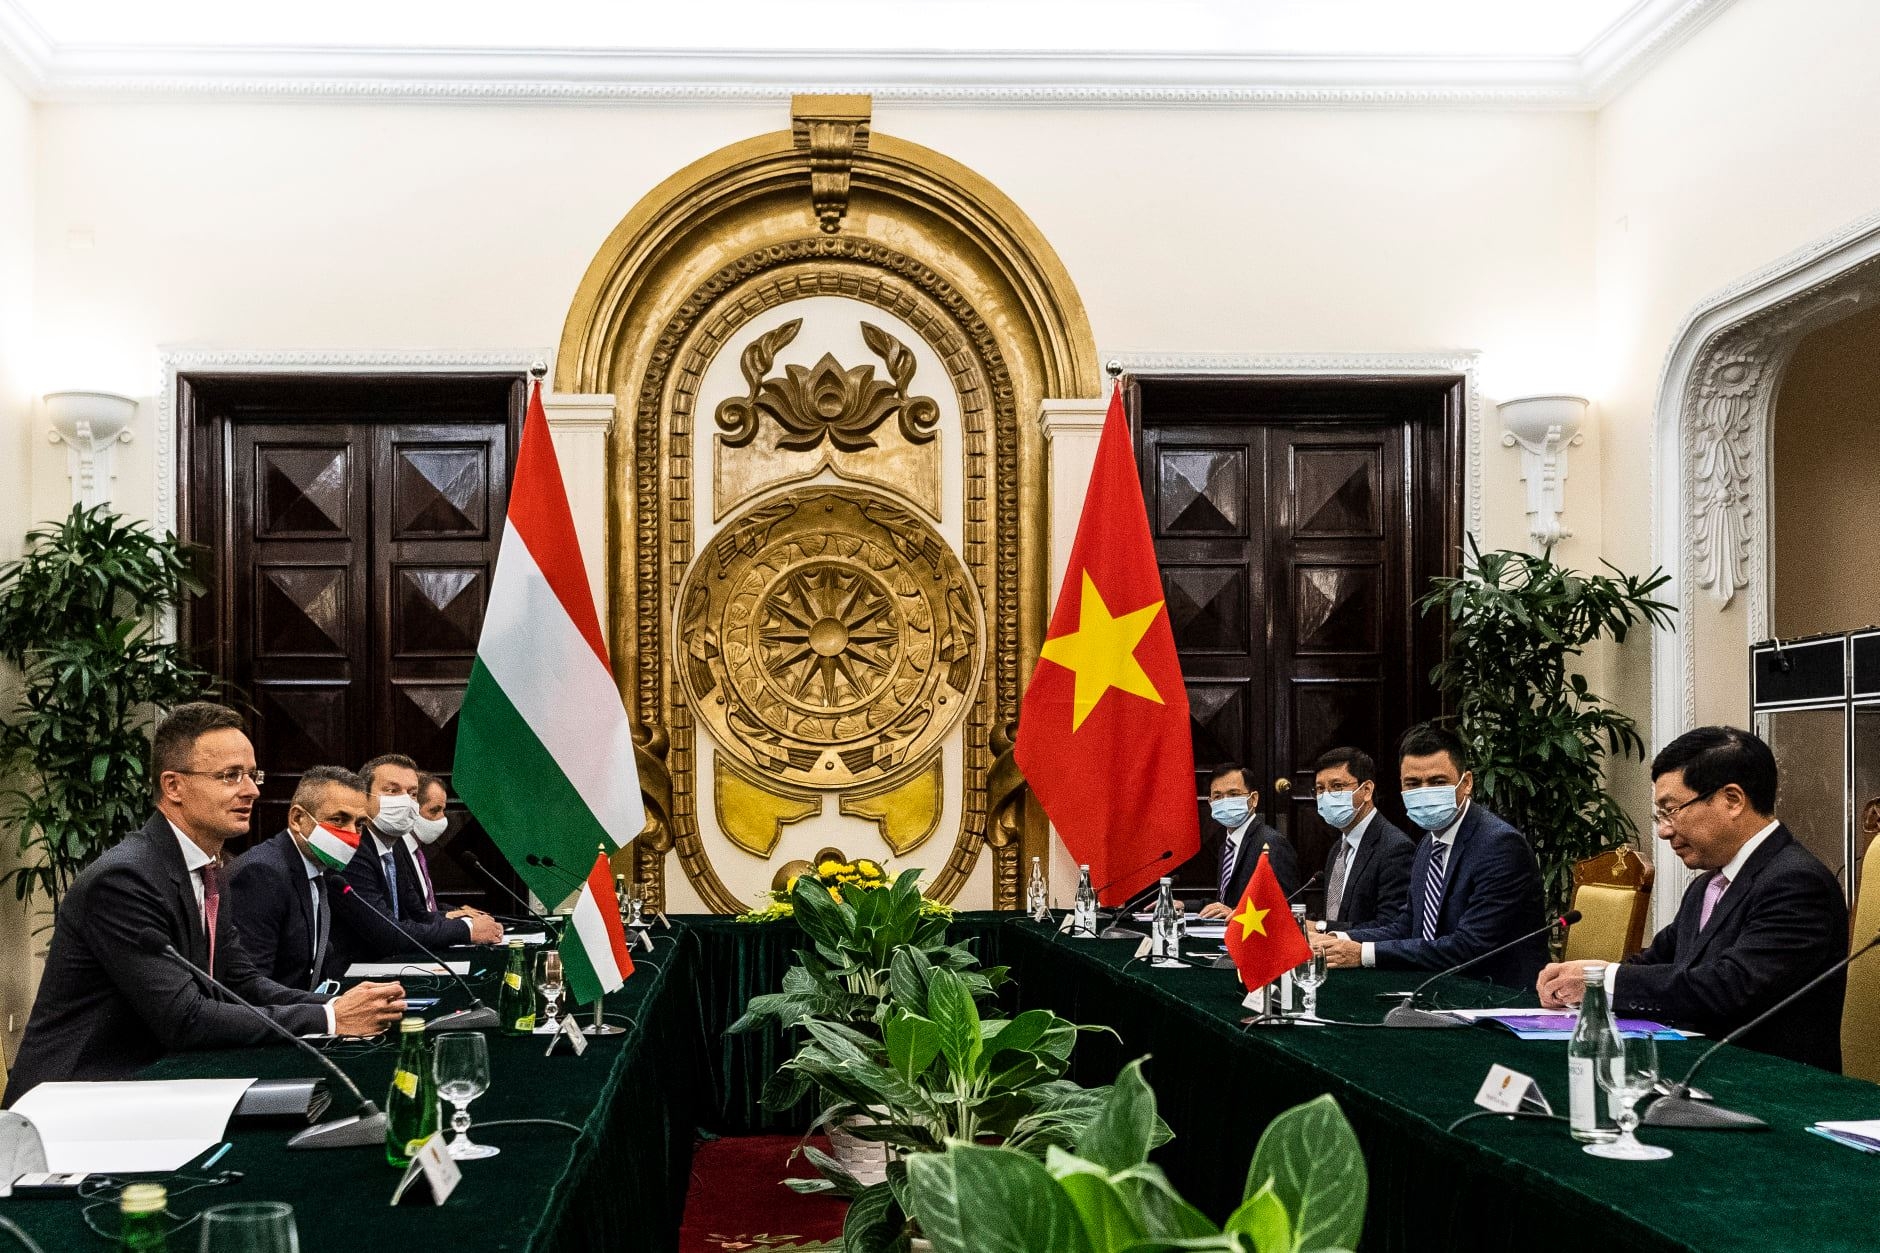 Hungary wishes to further strengthen comprehensive partnership with Vietnam